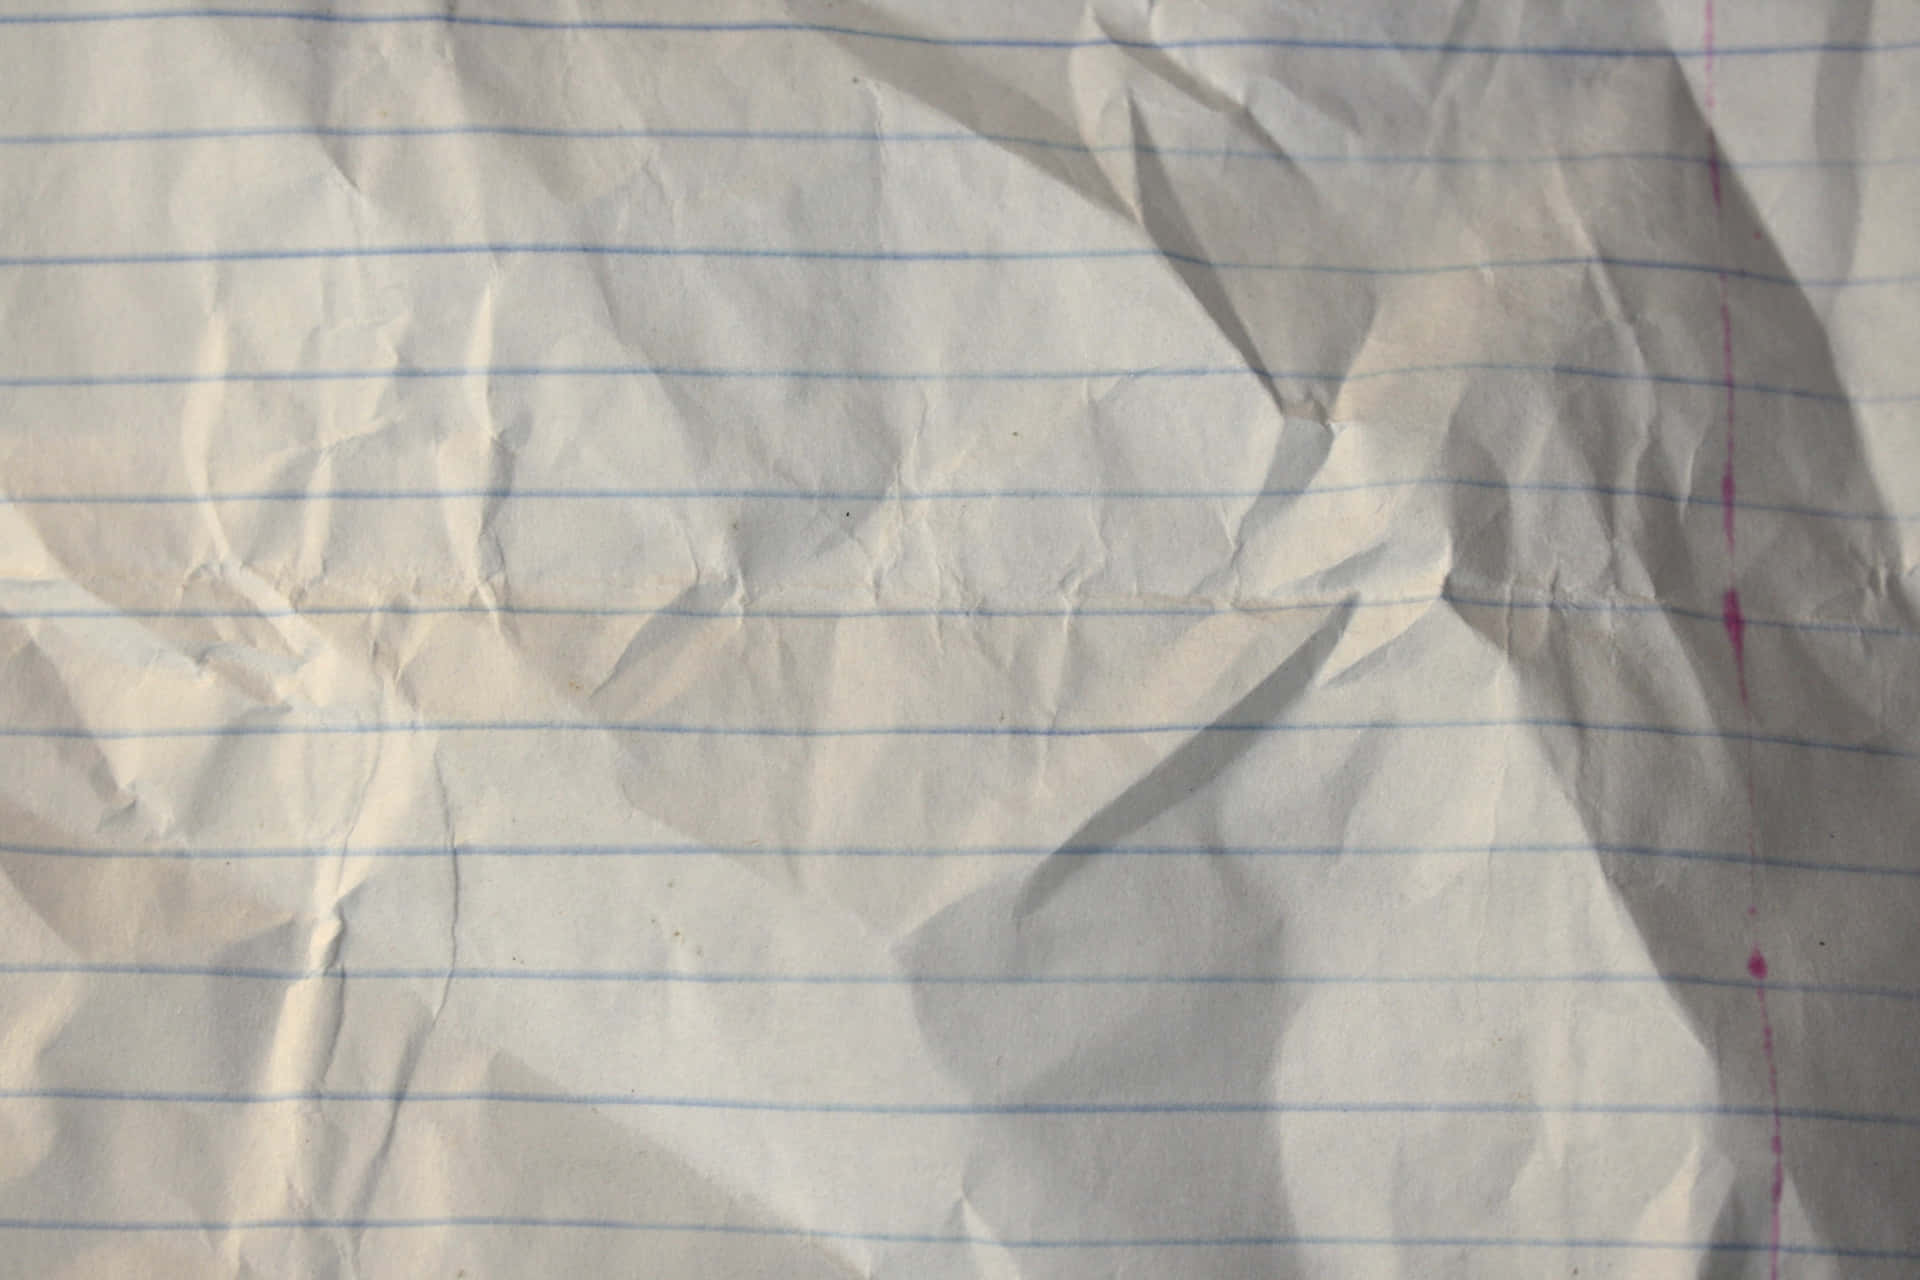 A Piece Of Paper With A Tear In It